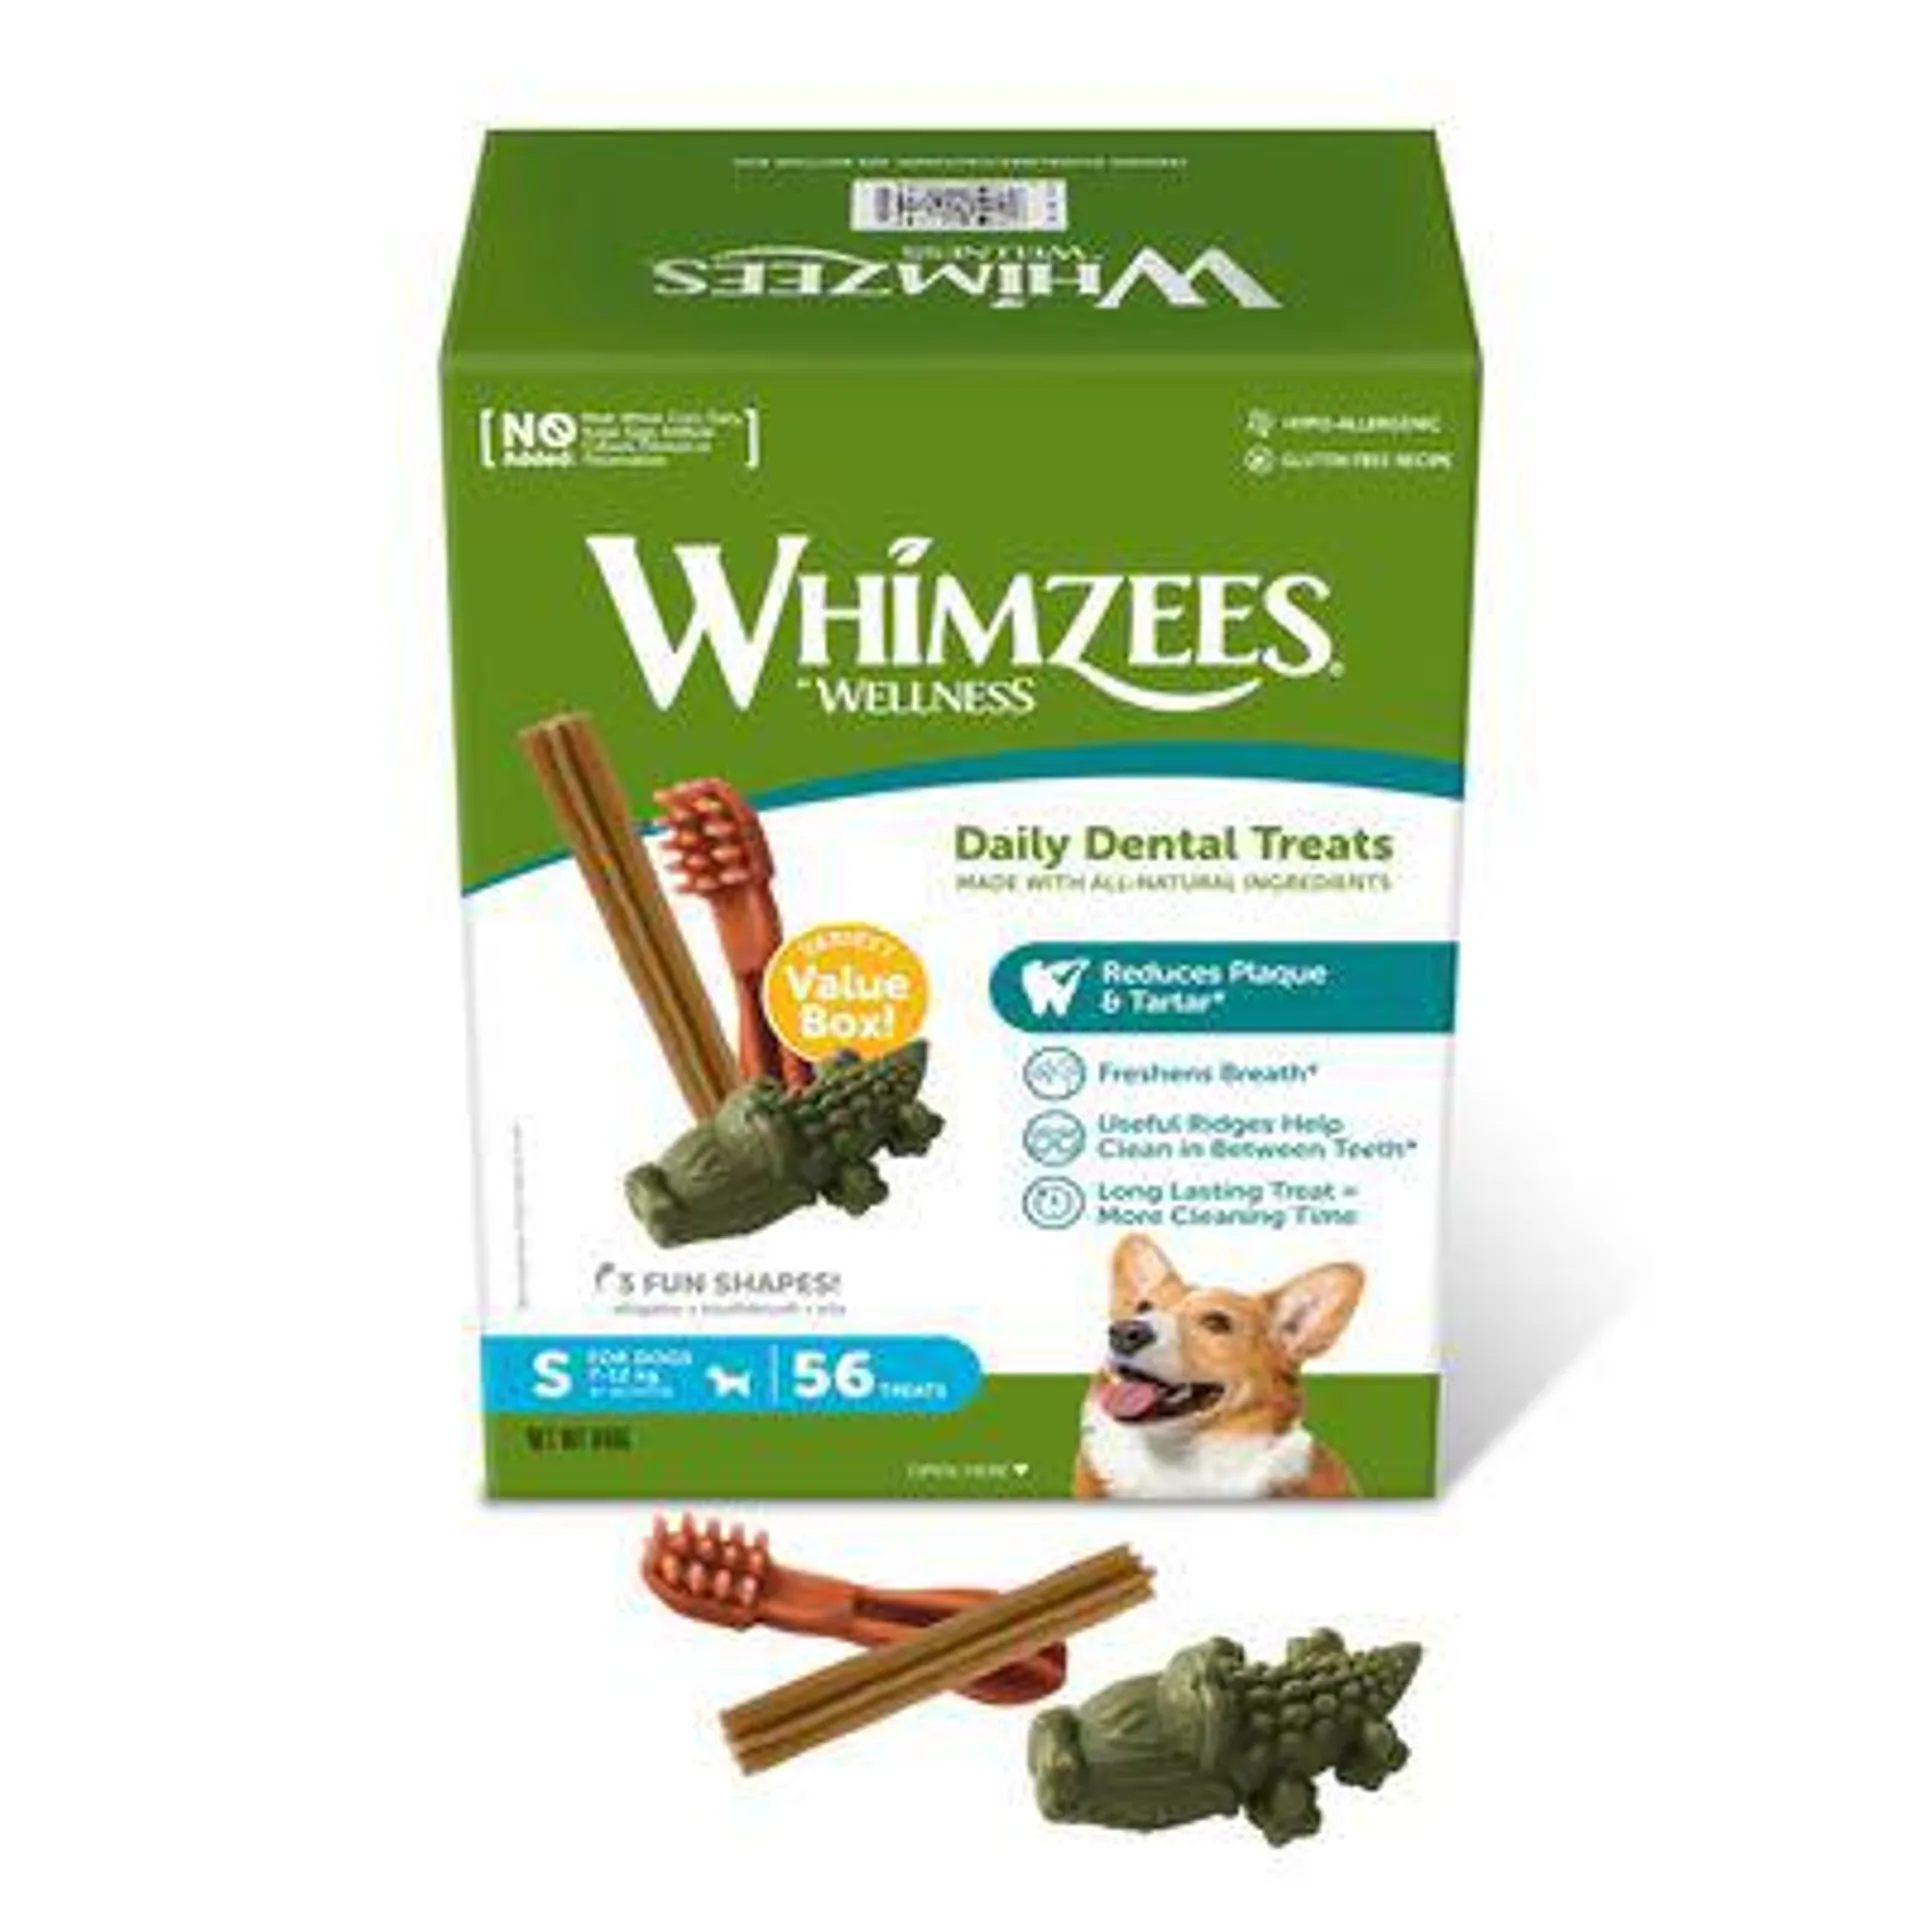 Whimzees by Wellness Mix Box Dog Snacks - 15% Off! *